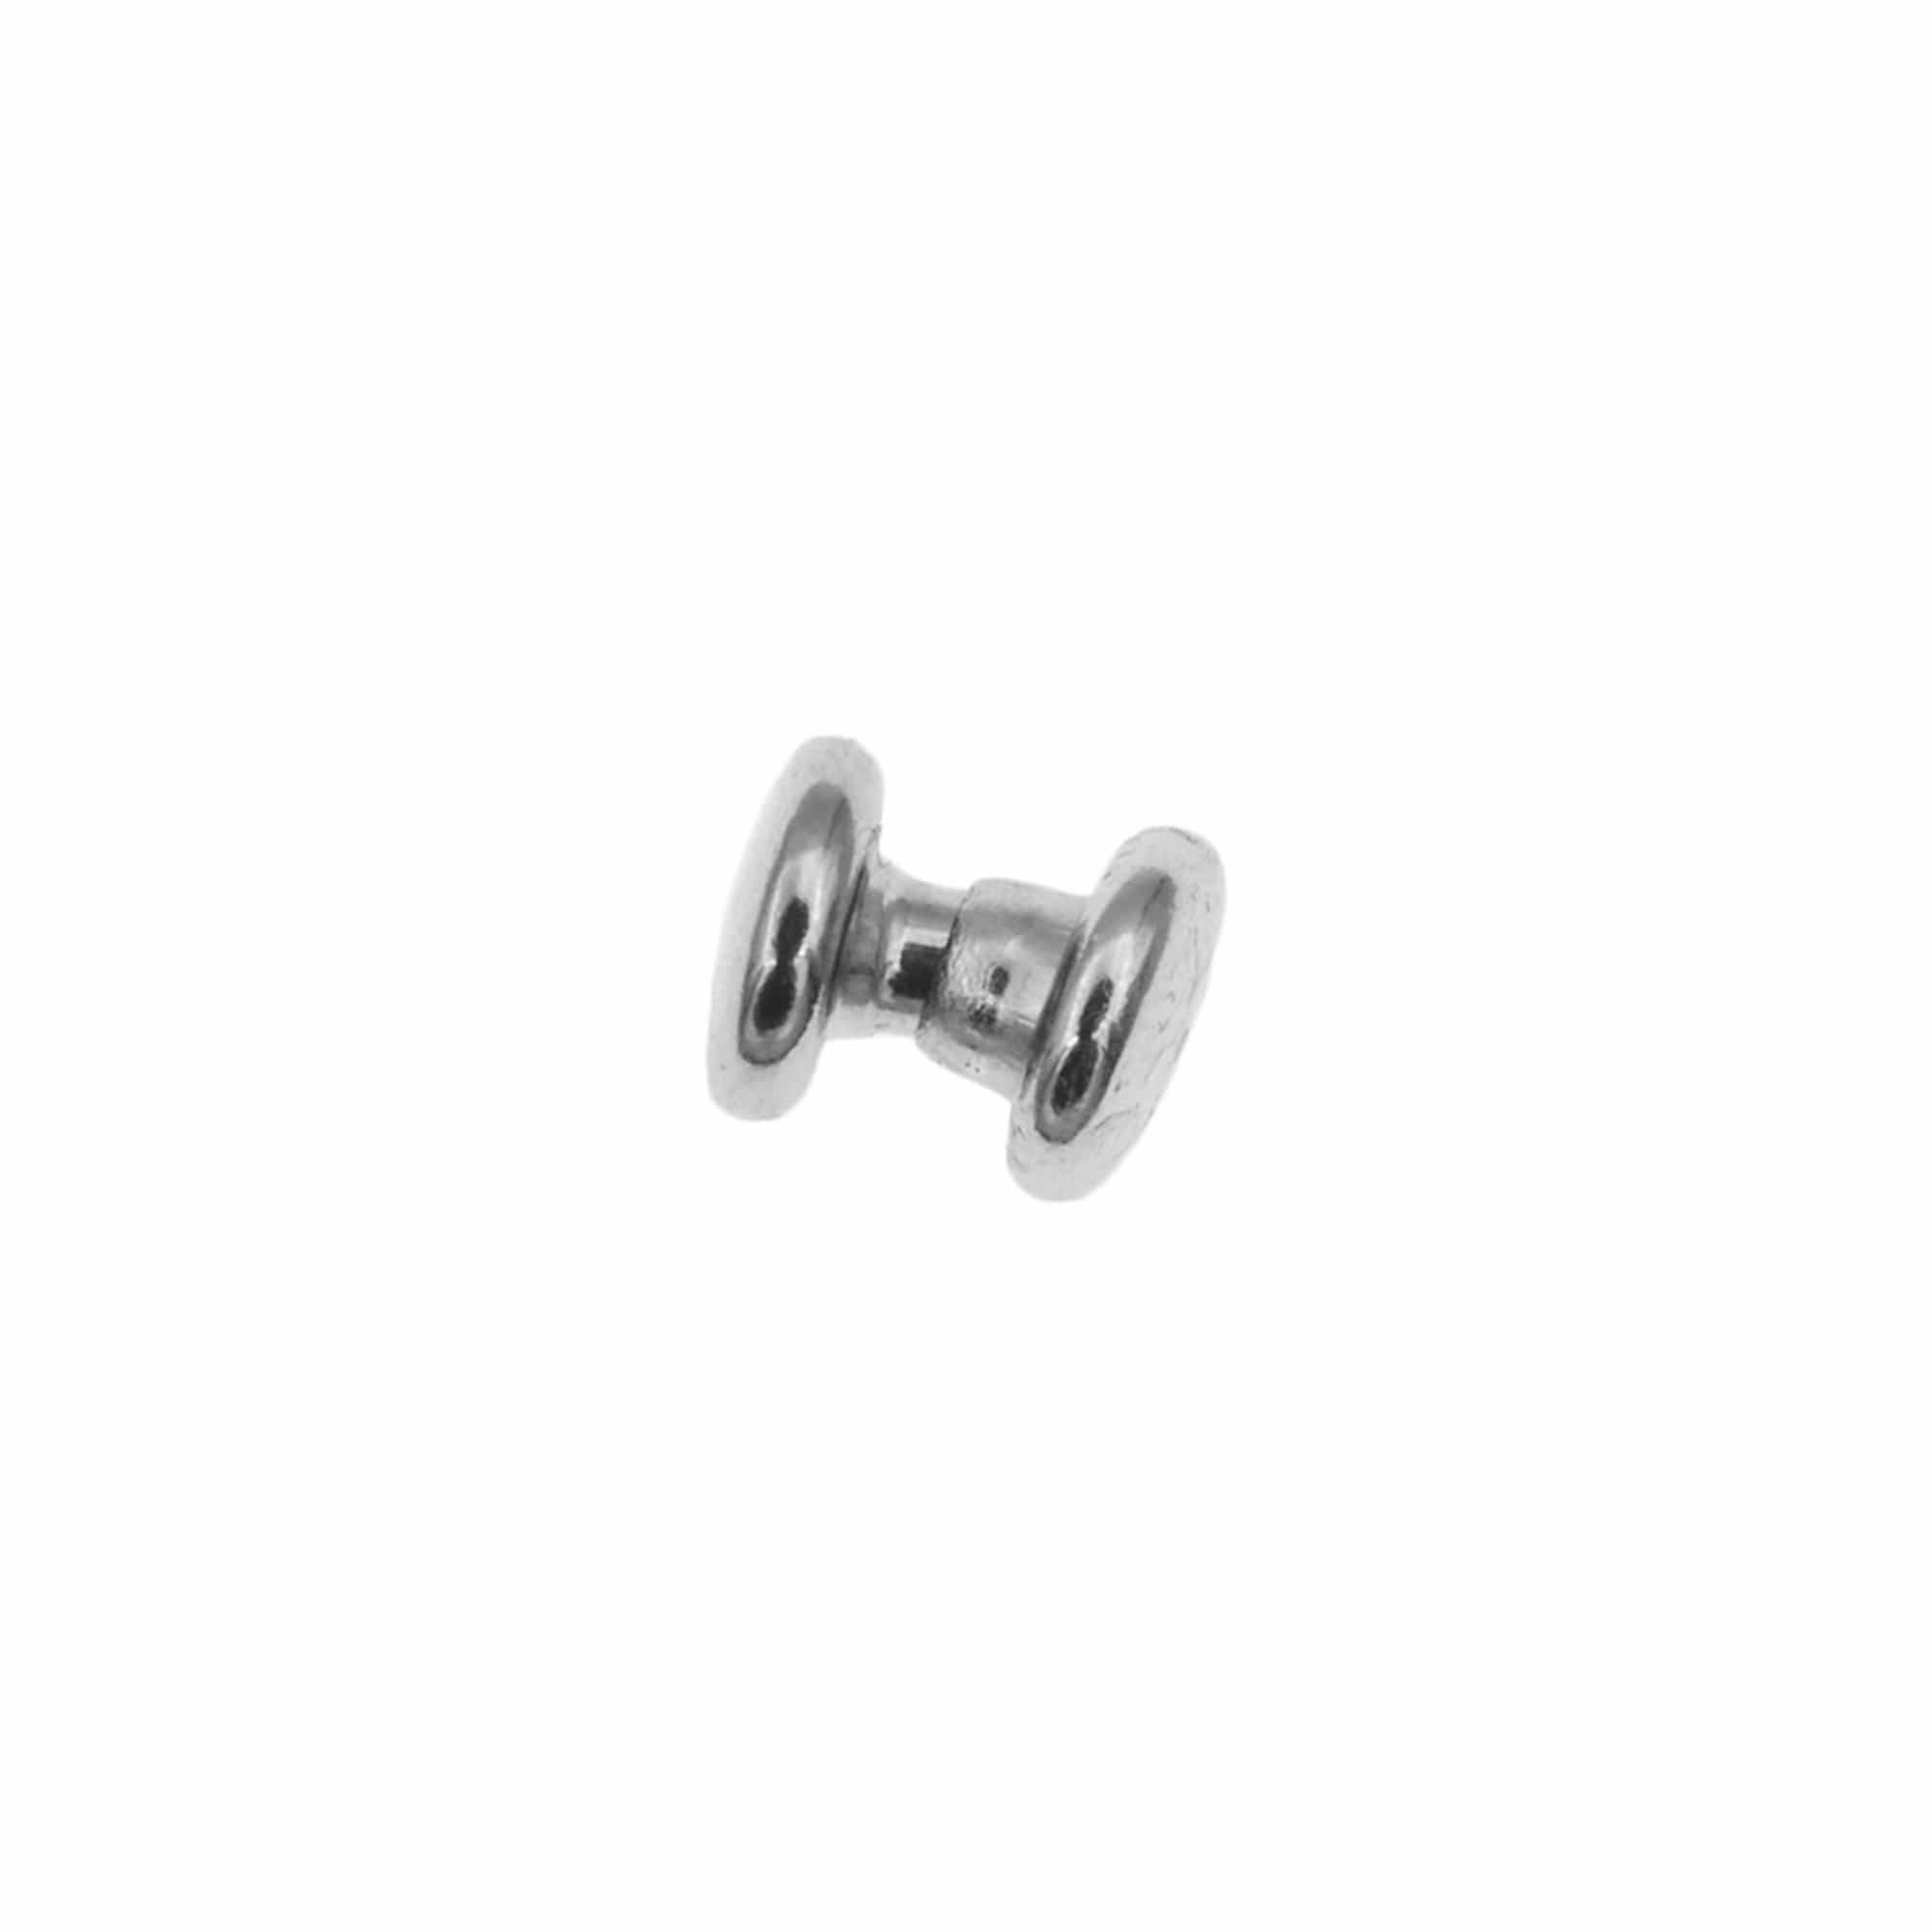 Ohio Travel Bag Fasteners 6mm Nickel Plate, Double Cap Jiffy Rivet, Steel, #A-337-NP A-337-NP